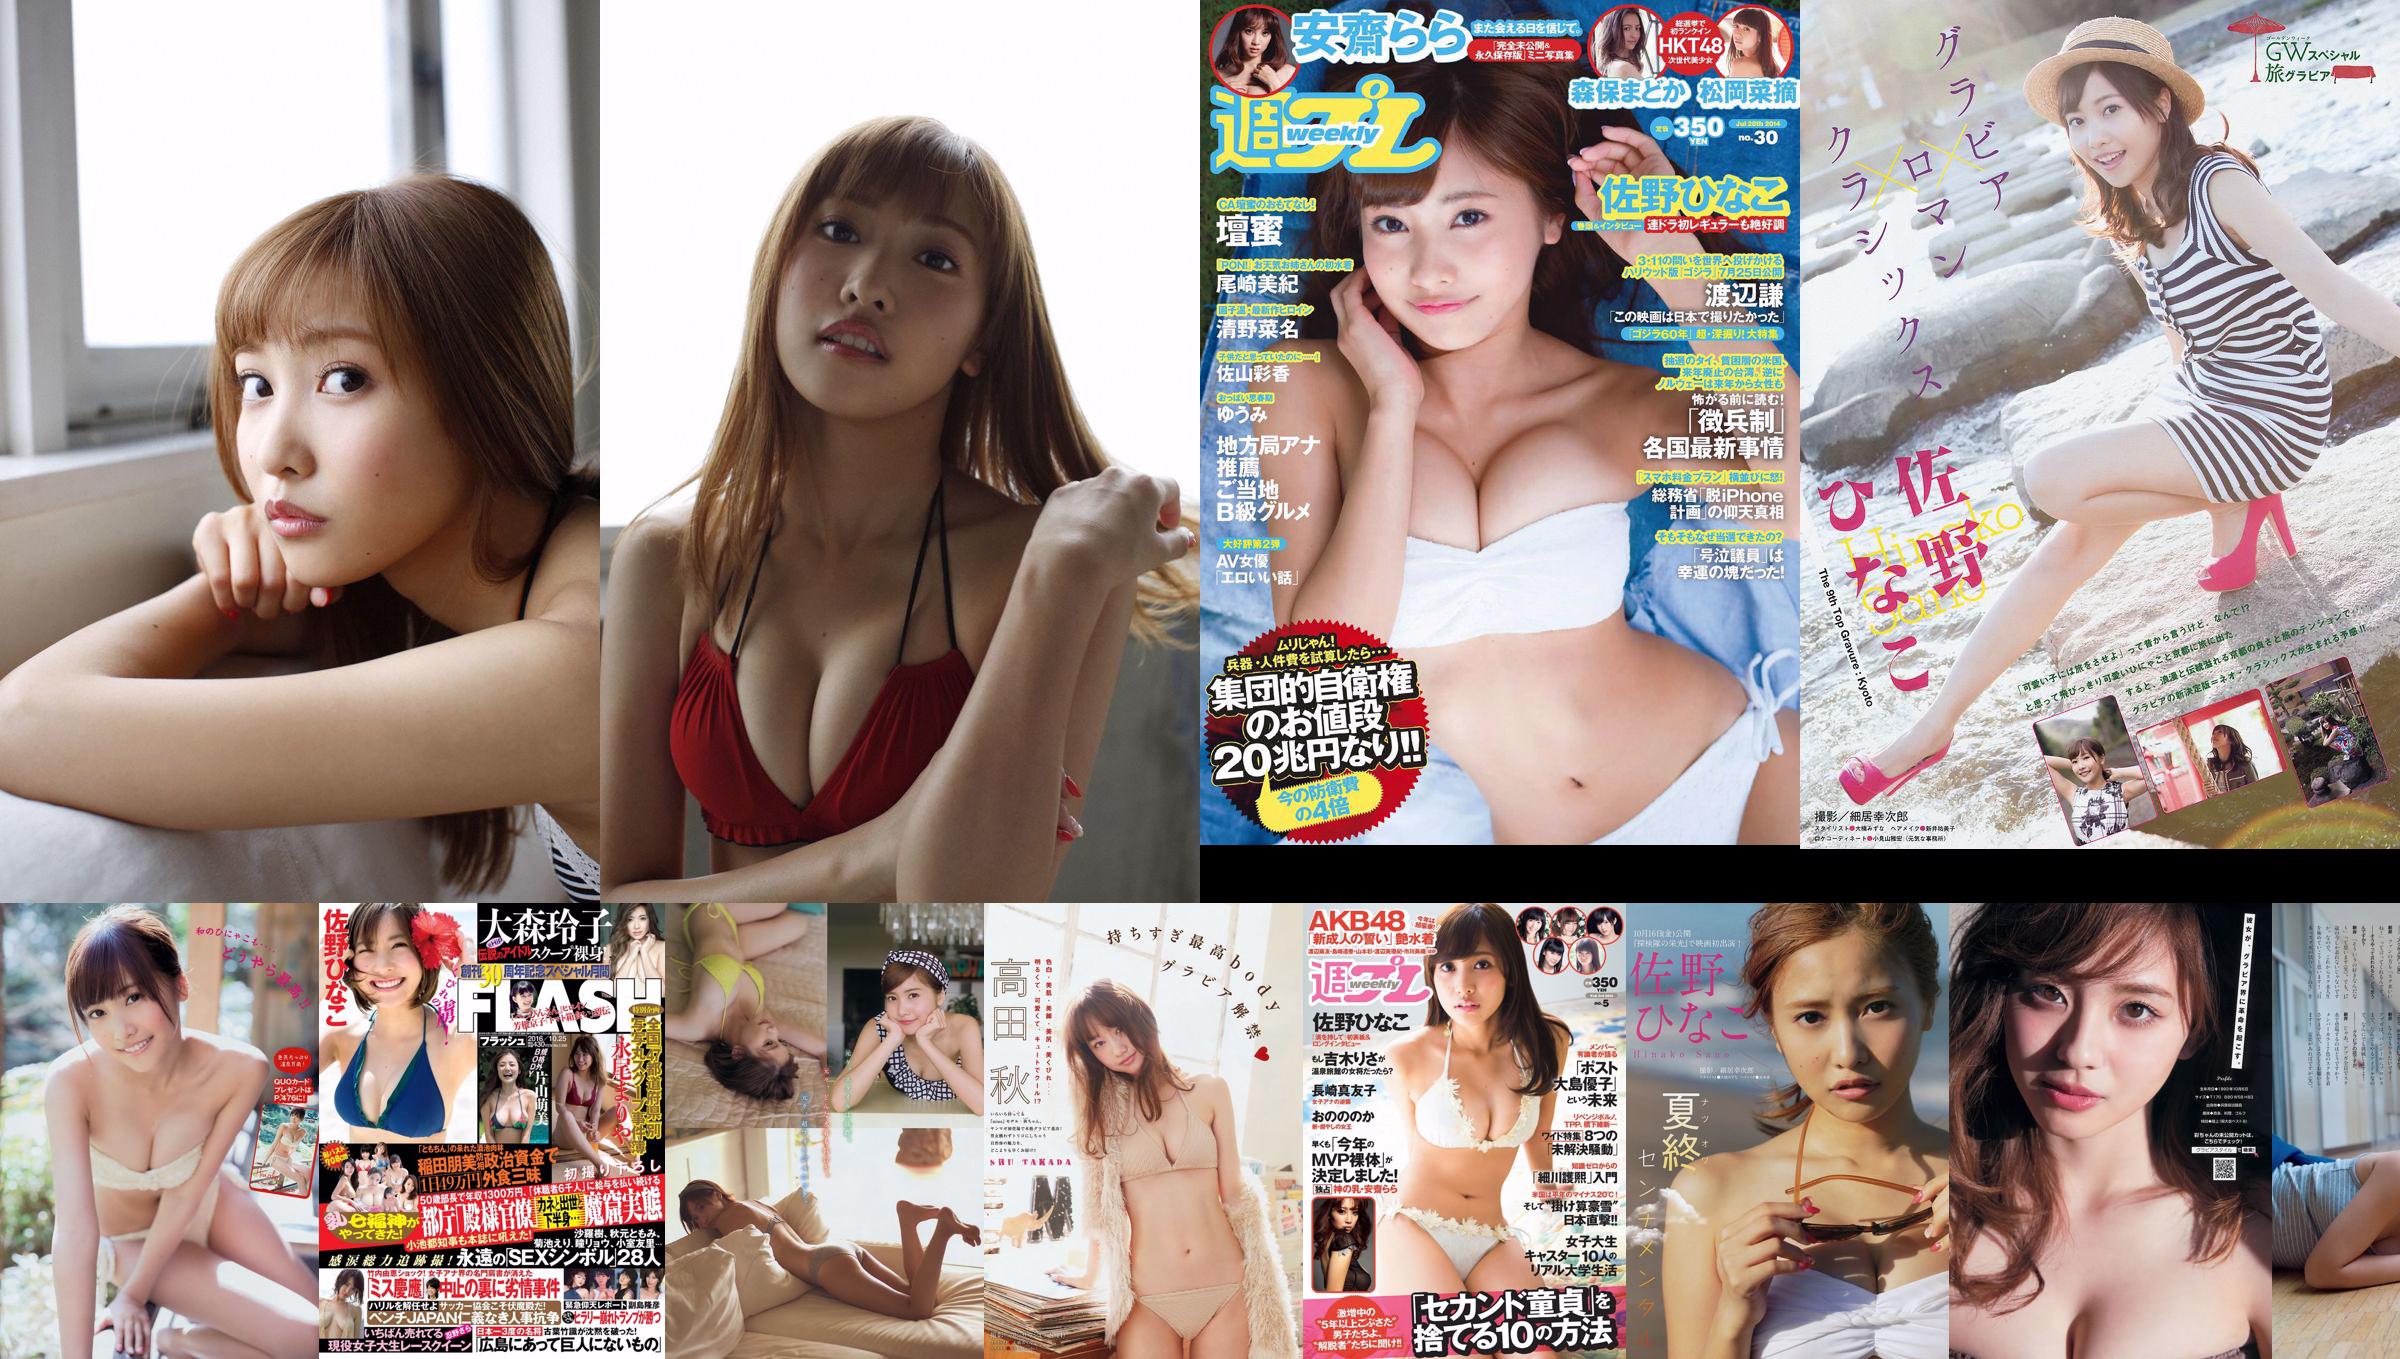 Sano Hinako "relax over the weekend" [WPB-net] No.179 No.baf094 Page 1